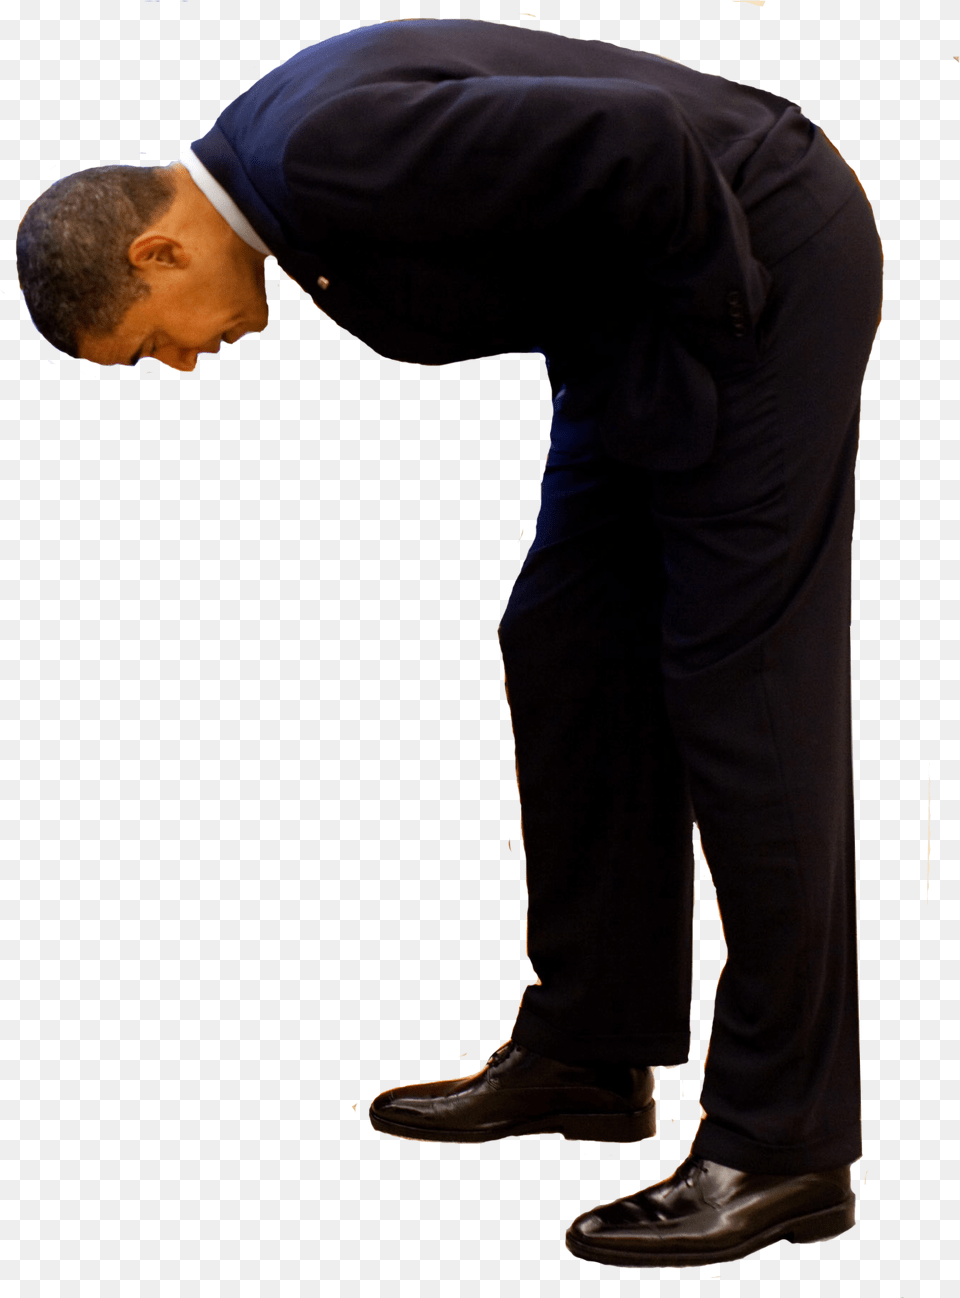 Obama Standing Man Looking Down Clipart Full Obama Looking Down At Phone, Clothing, Shoe, Footwear, Adult Png Image